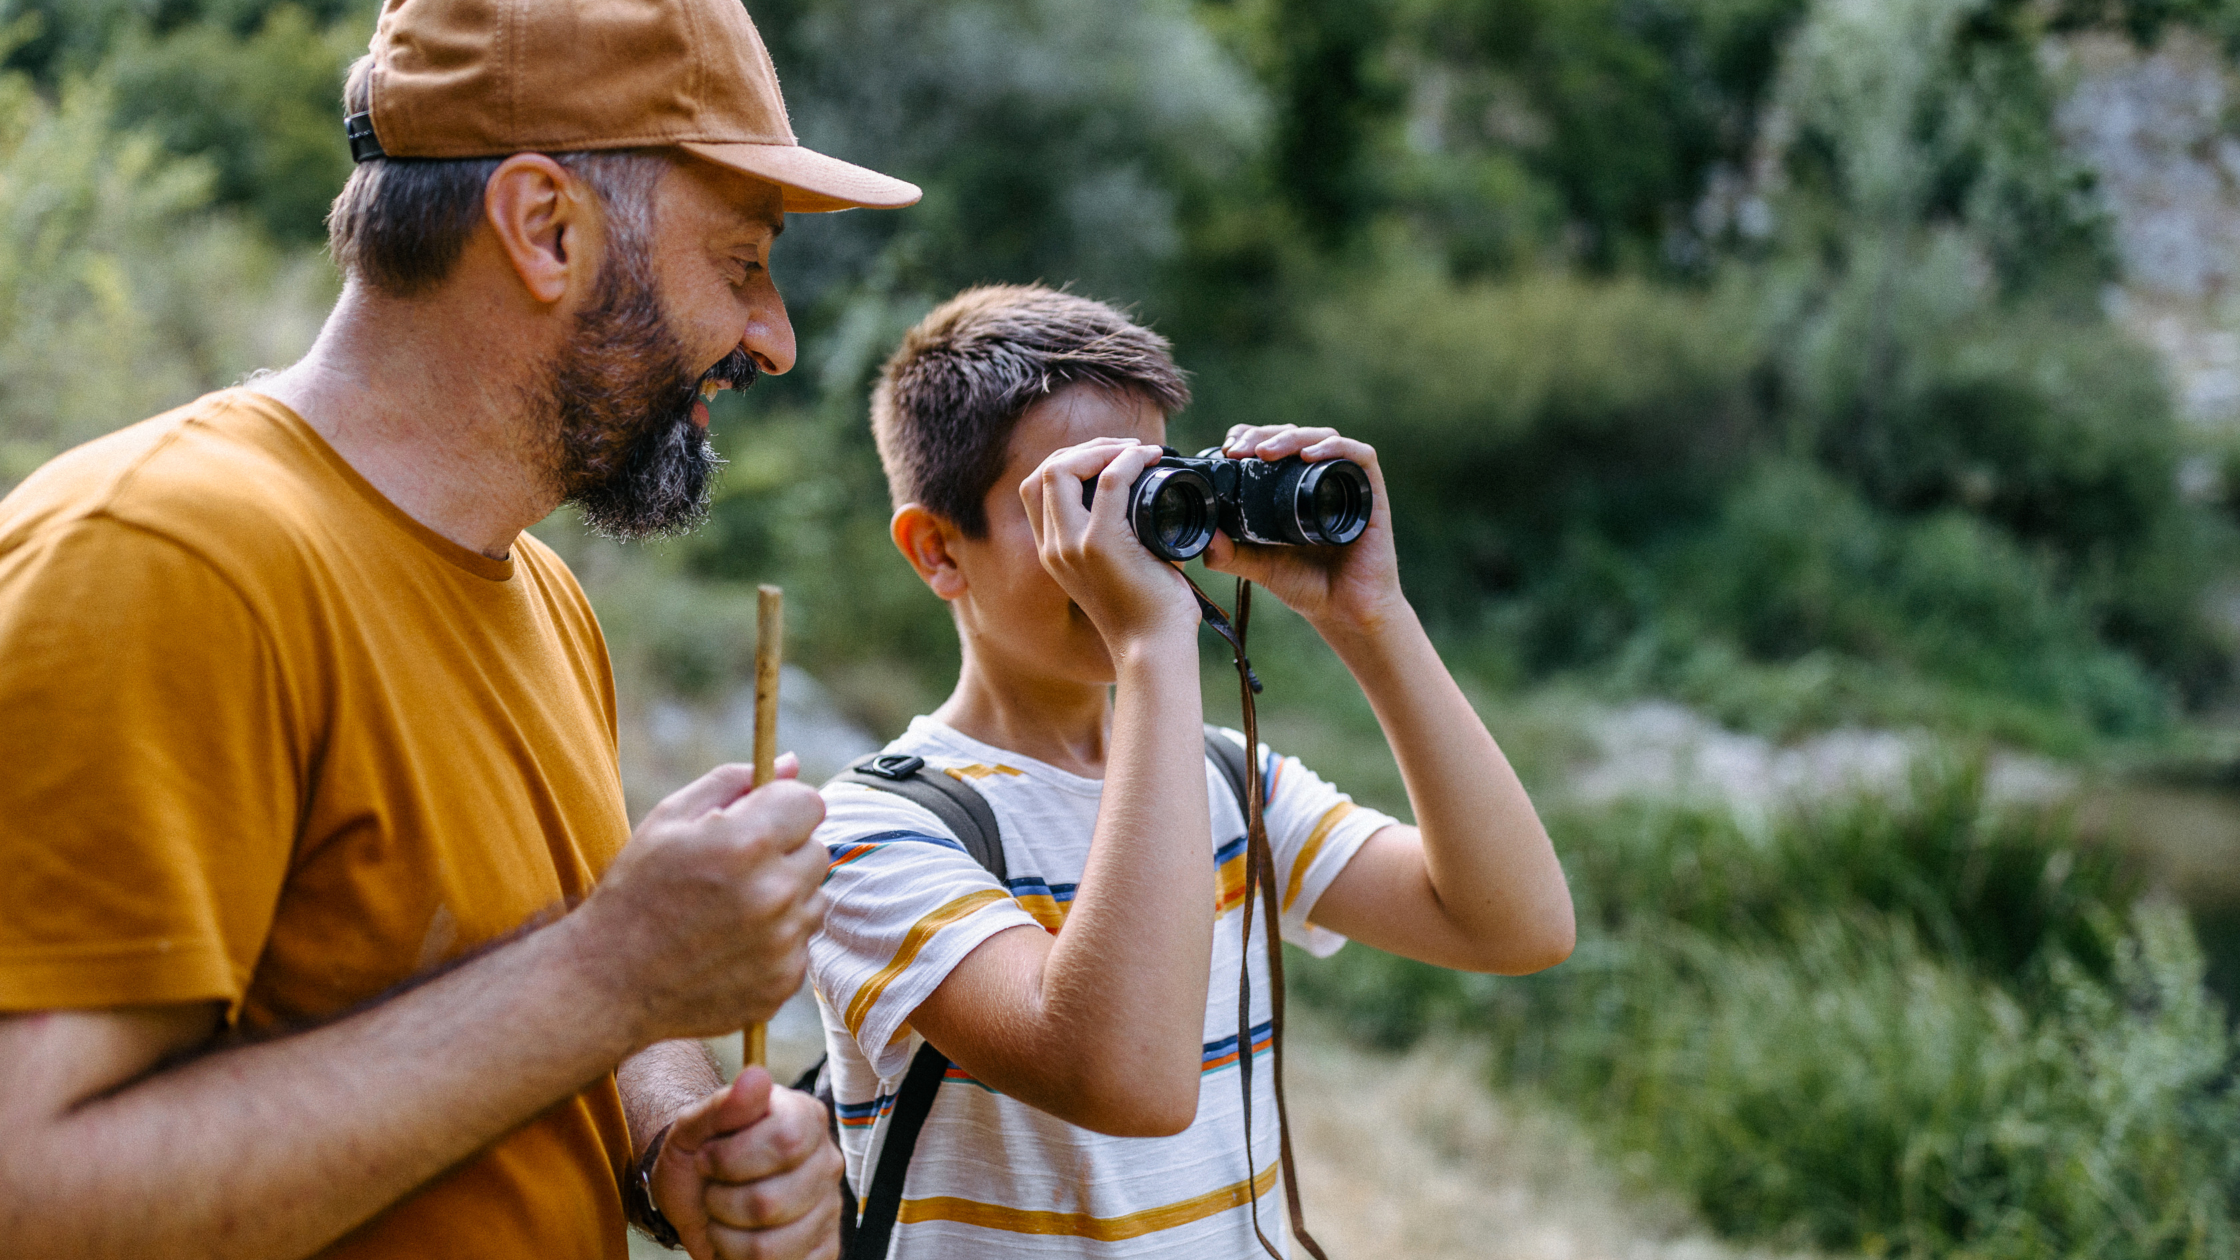 How To Incorporate Education And Learning Into Outdoor Adventures